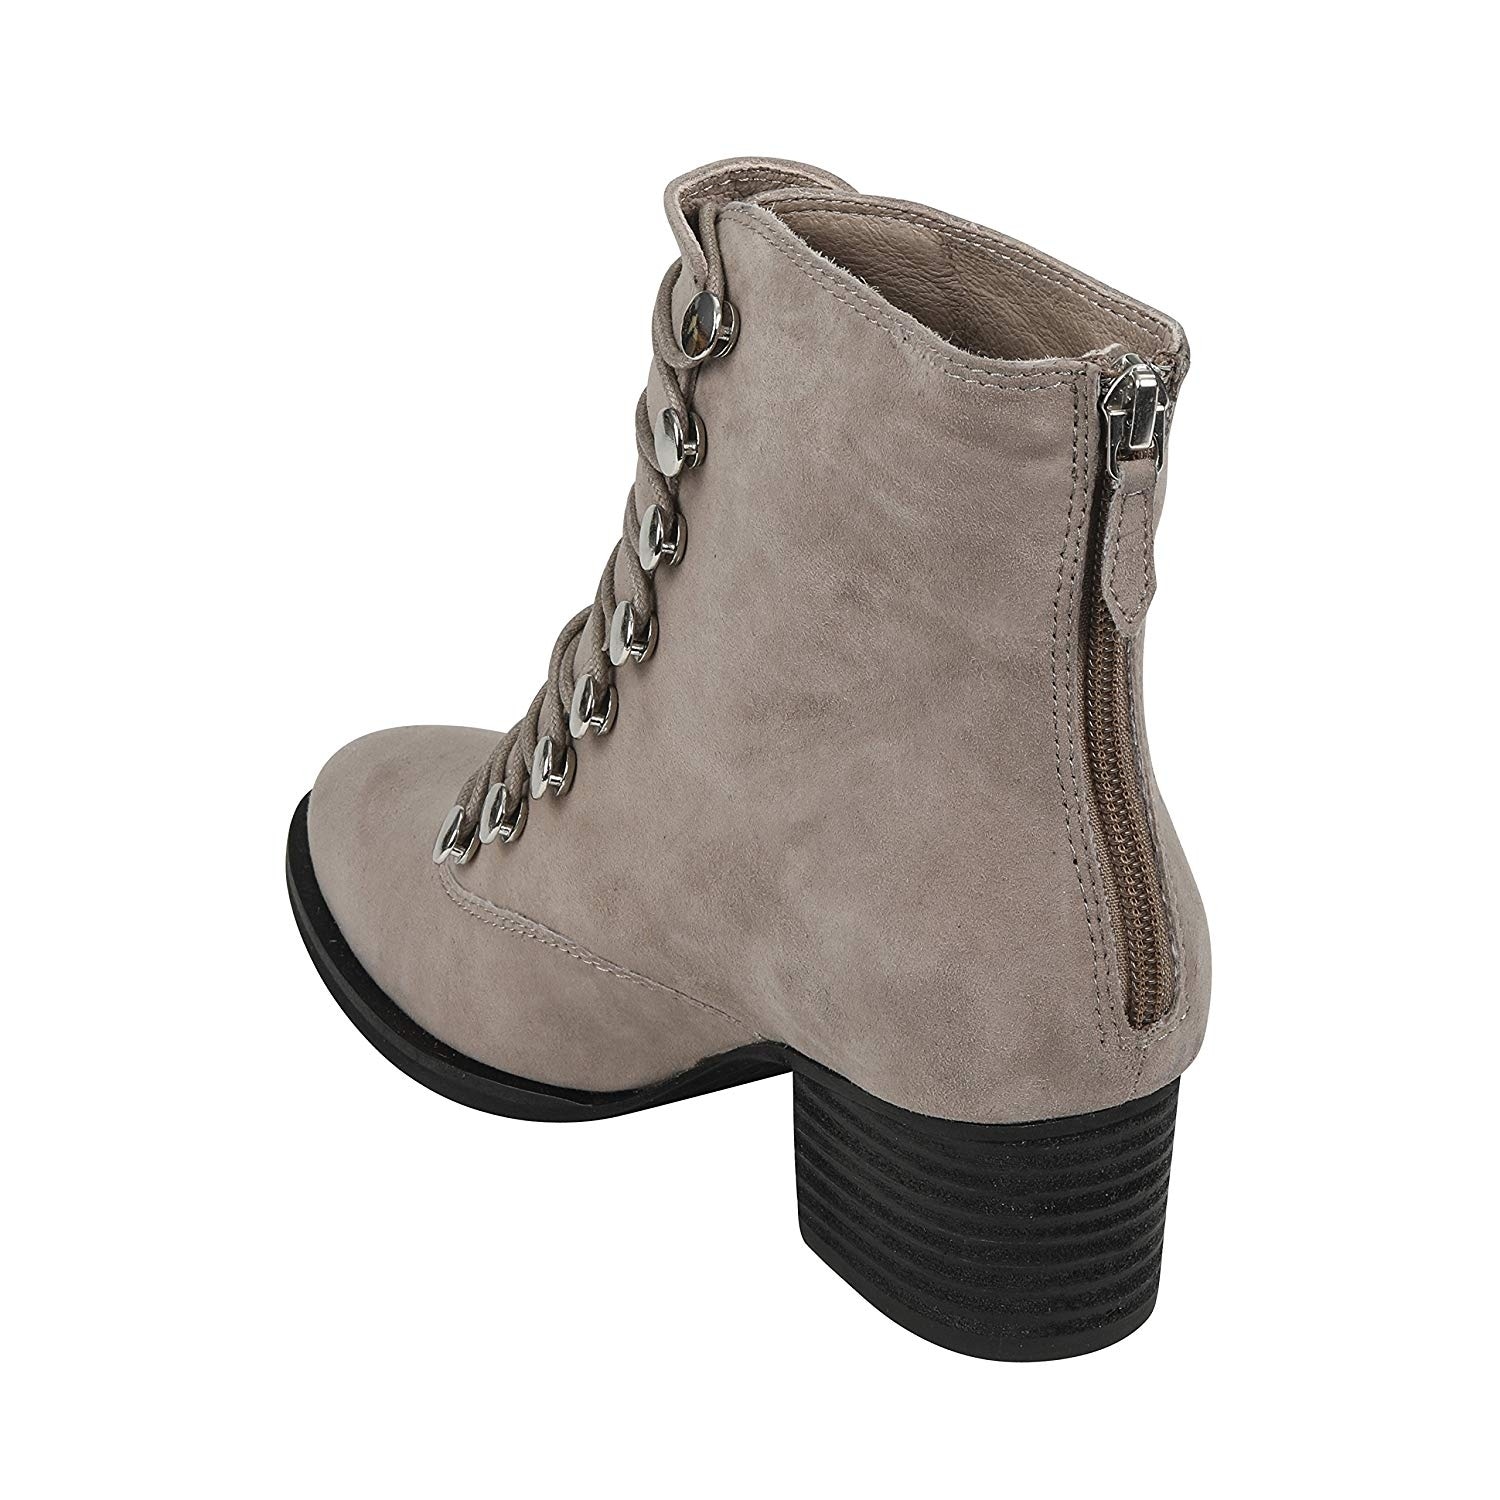 earth doral boots